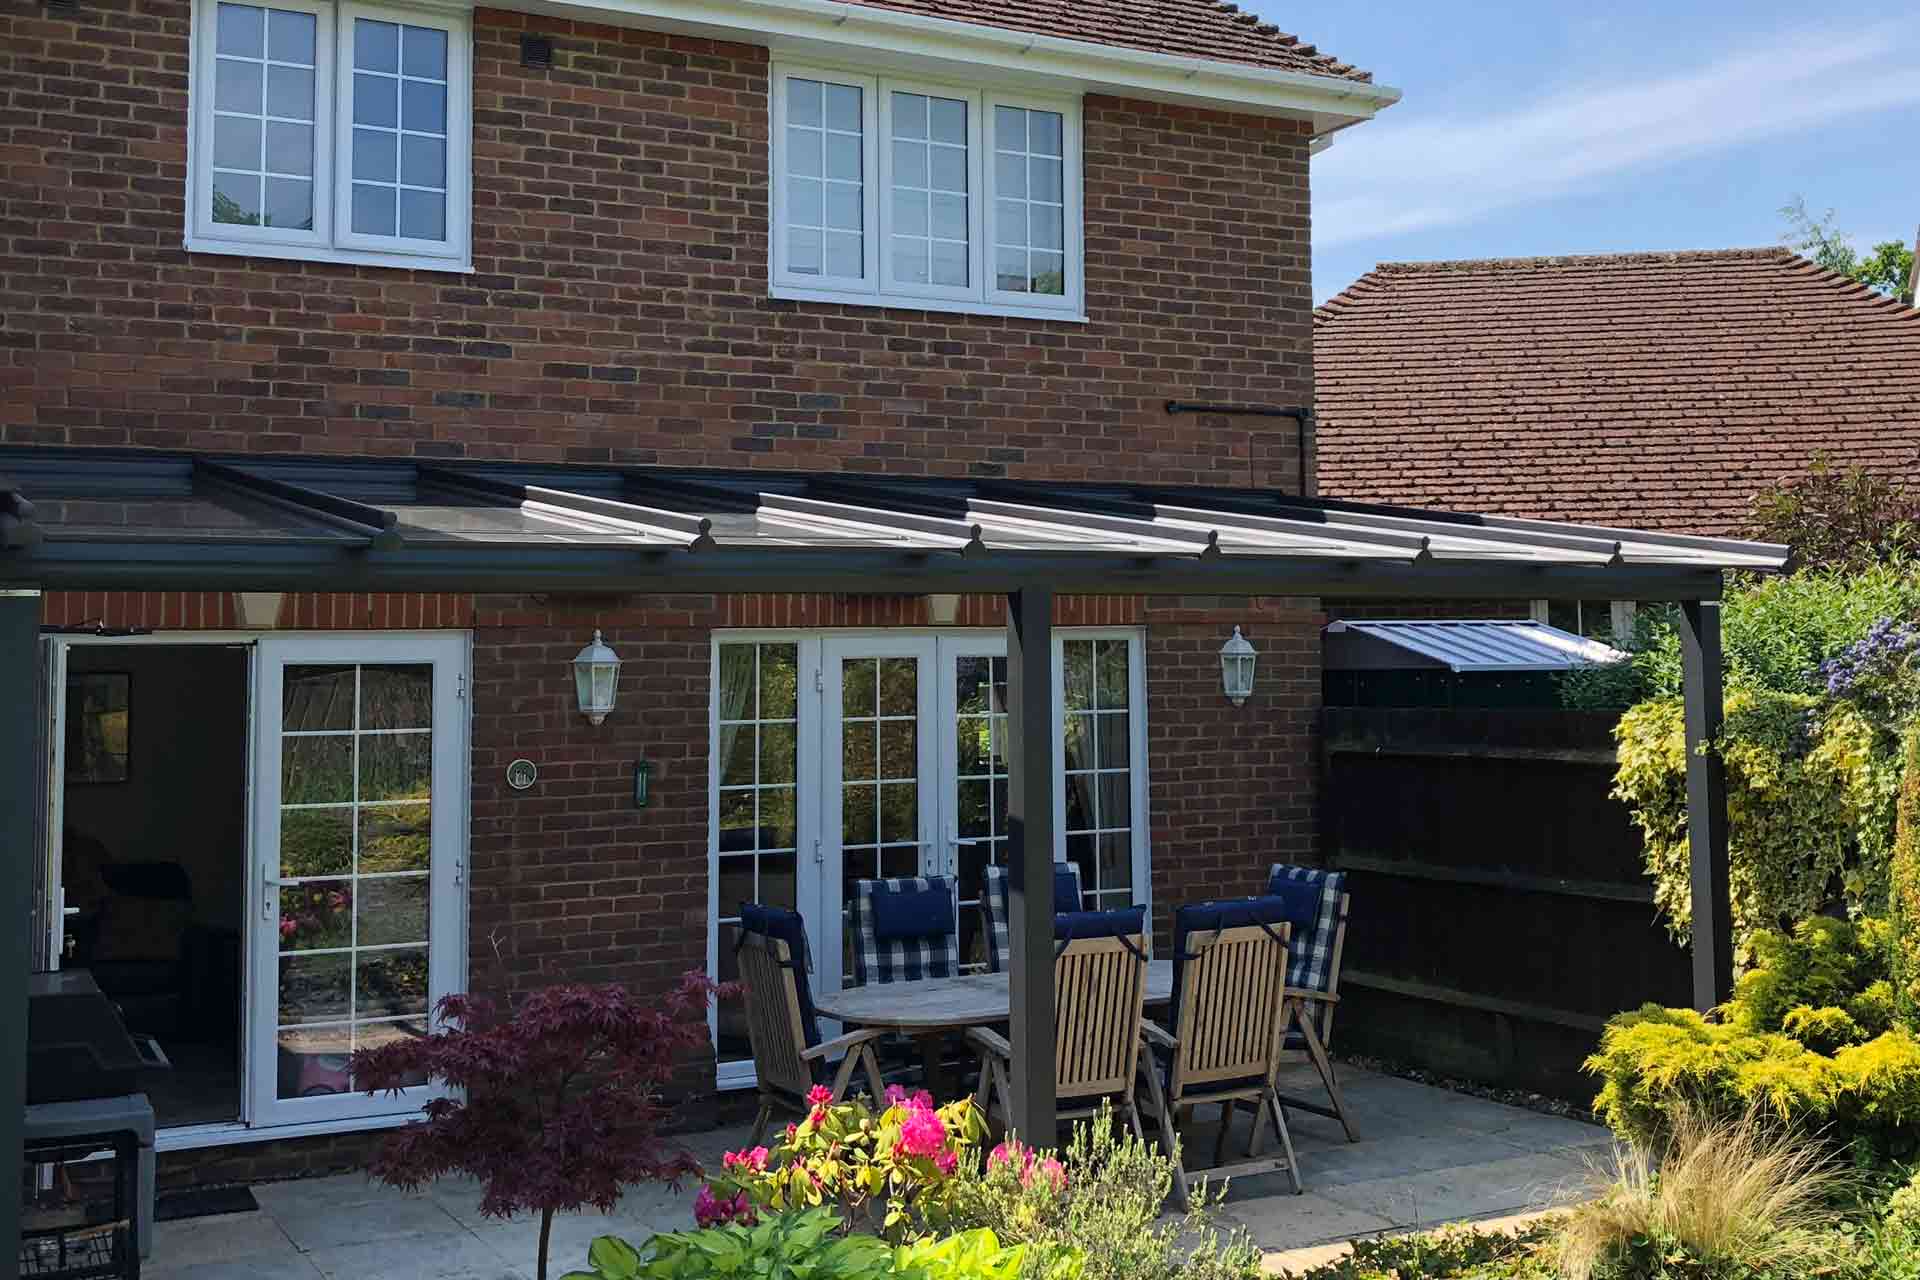 A veranda for outside cooking and dining in Basingstoke